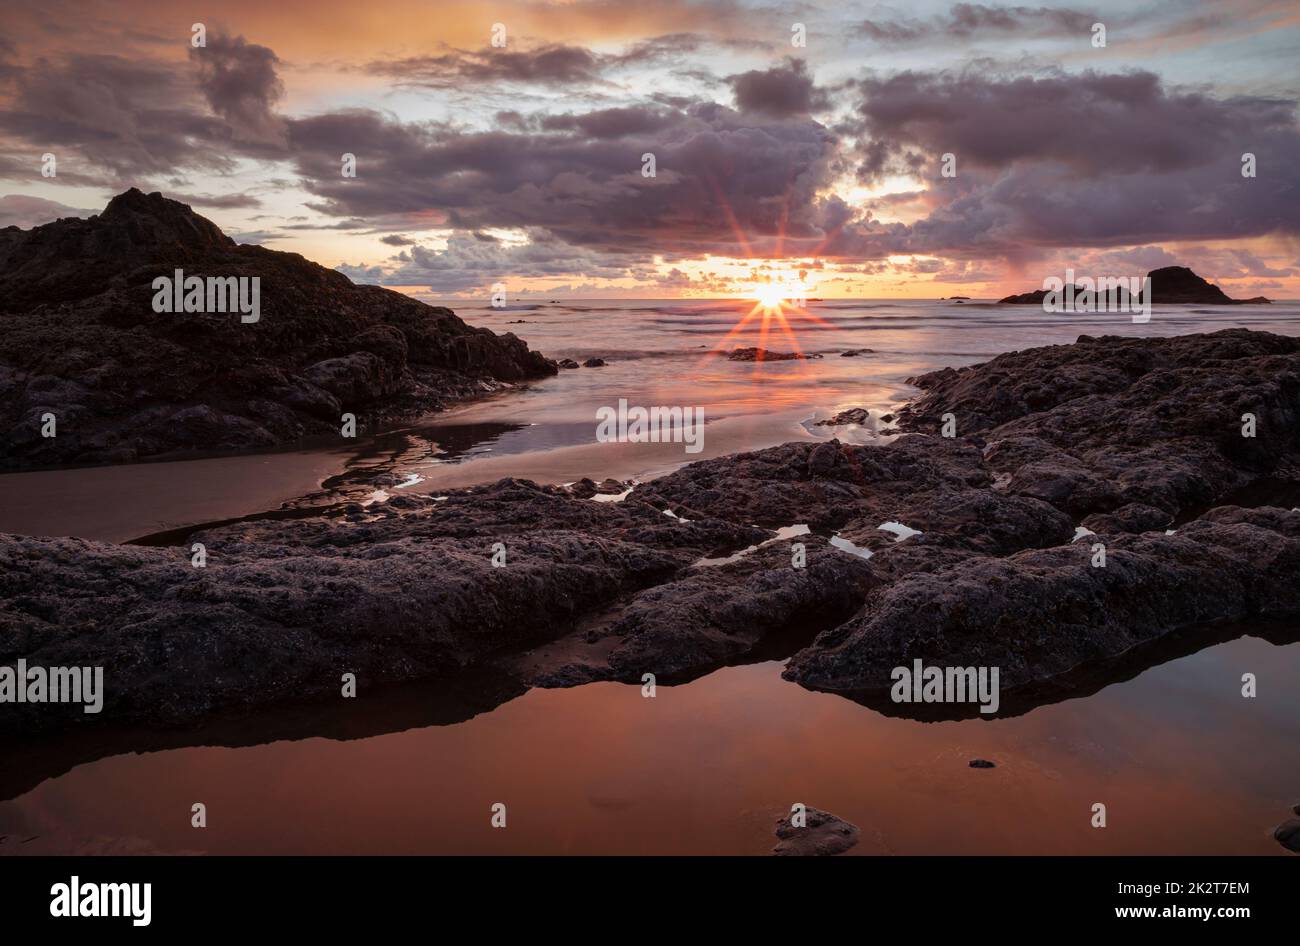 WA22055-00...WASHINGTON - The Pacific Ocean at sunset from Ruby Beach in Olympic National Park. Stock Photo